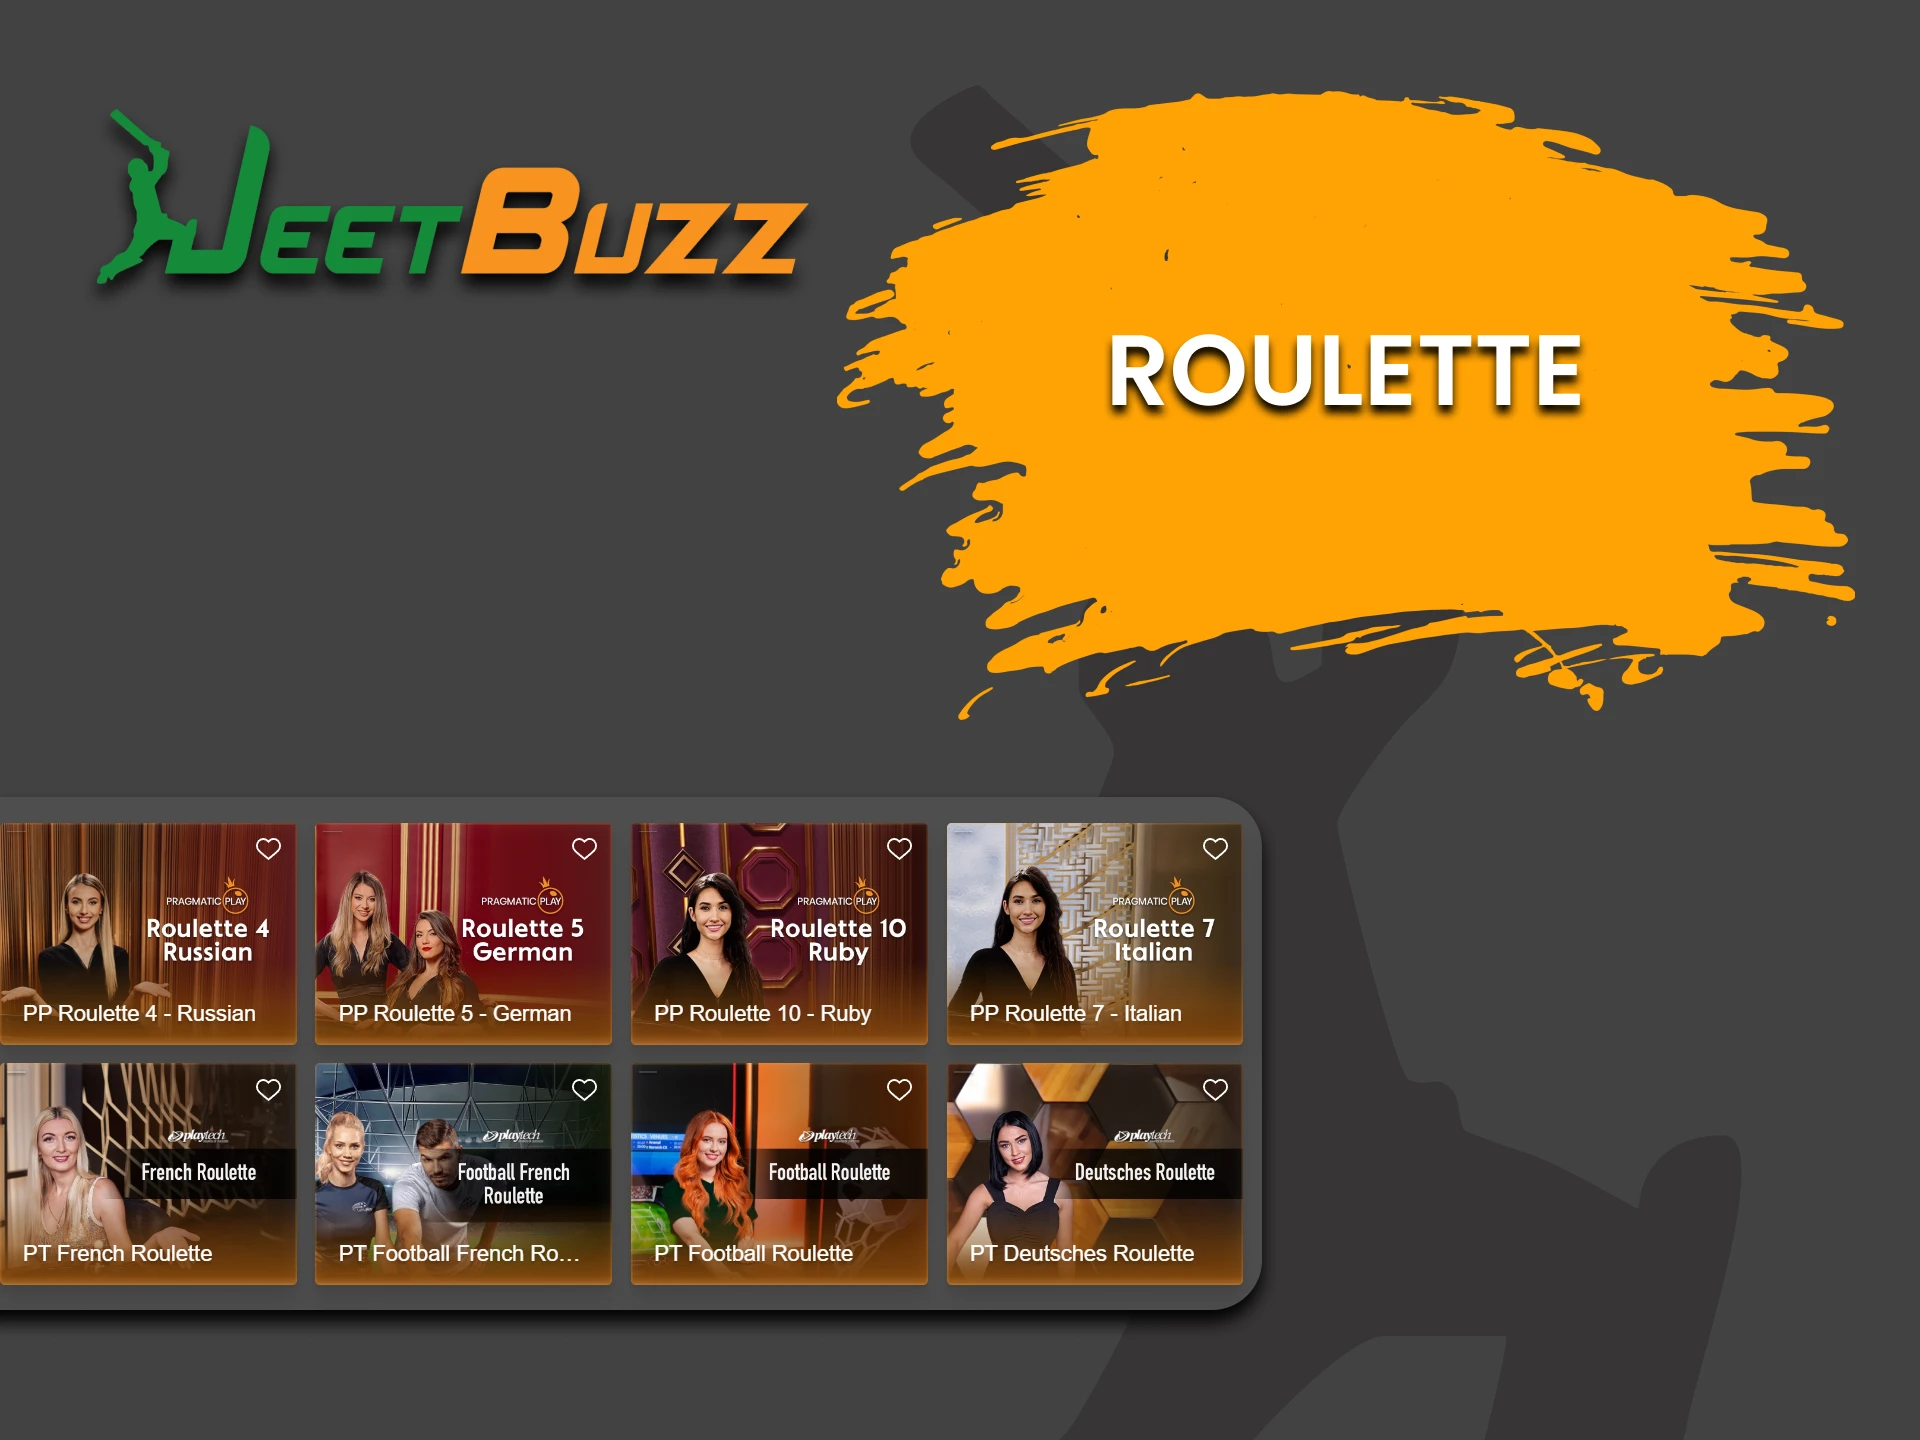 To play live casino on JettBuzz, choose Roulette.